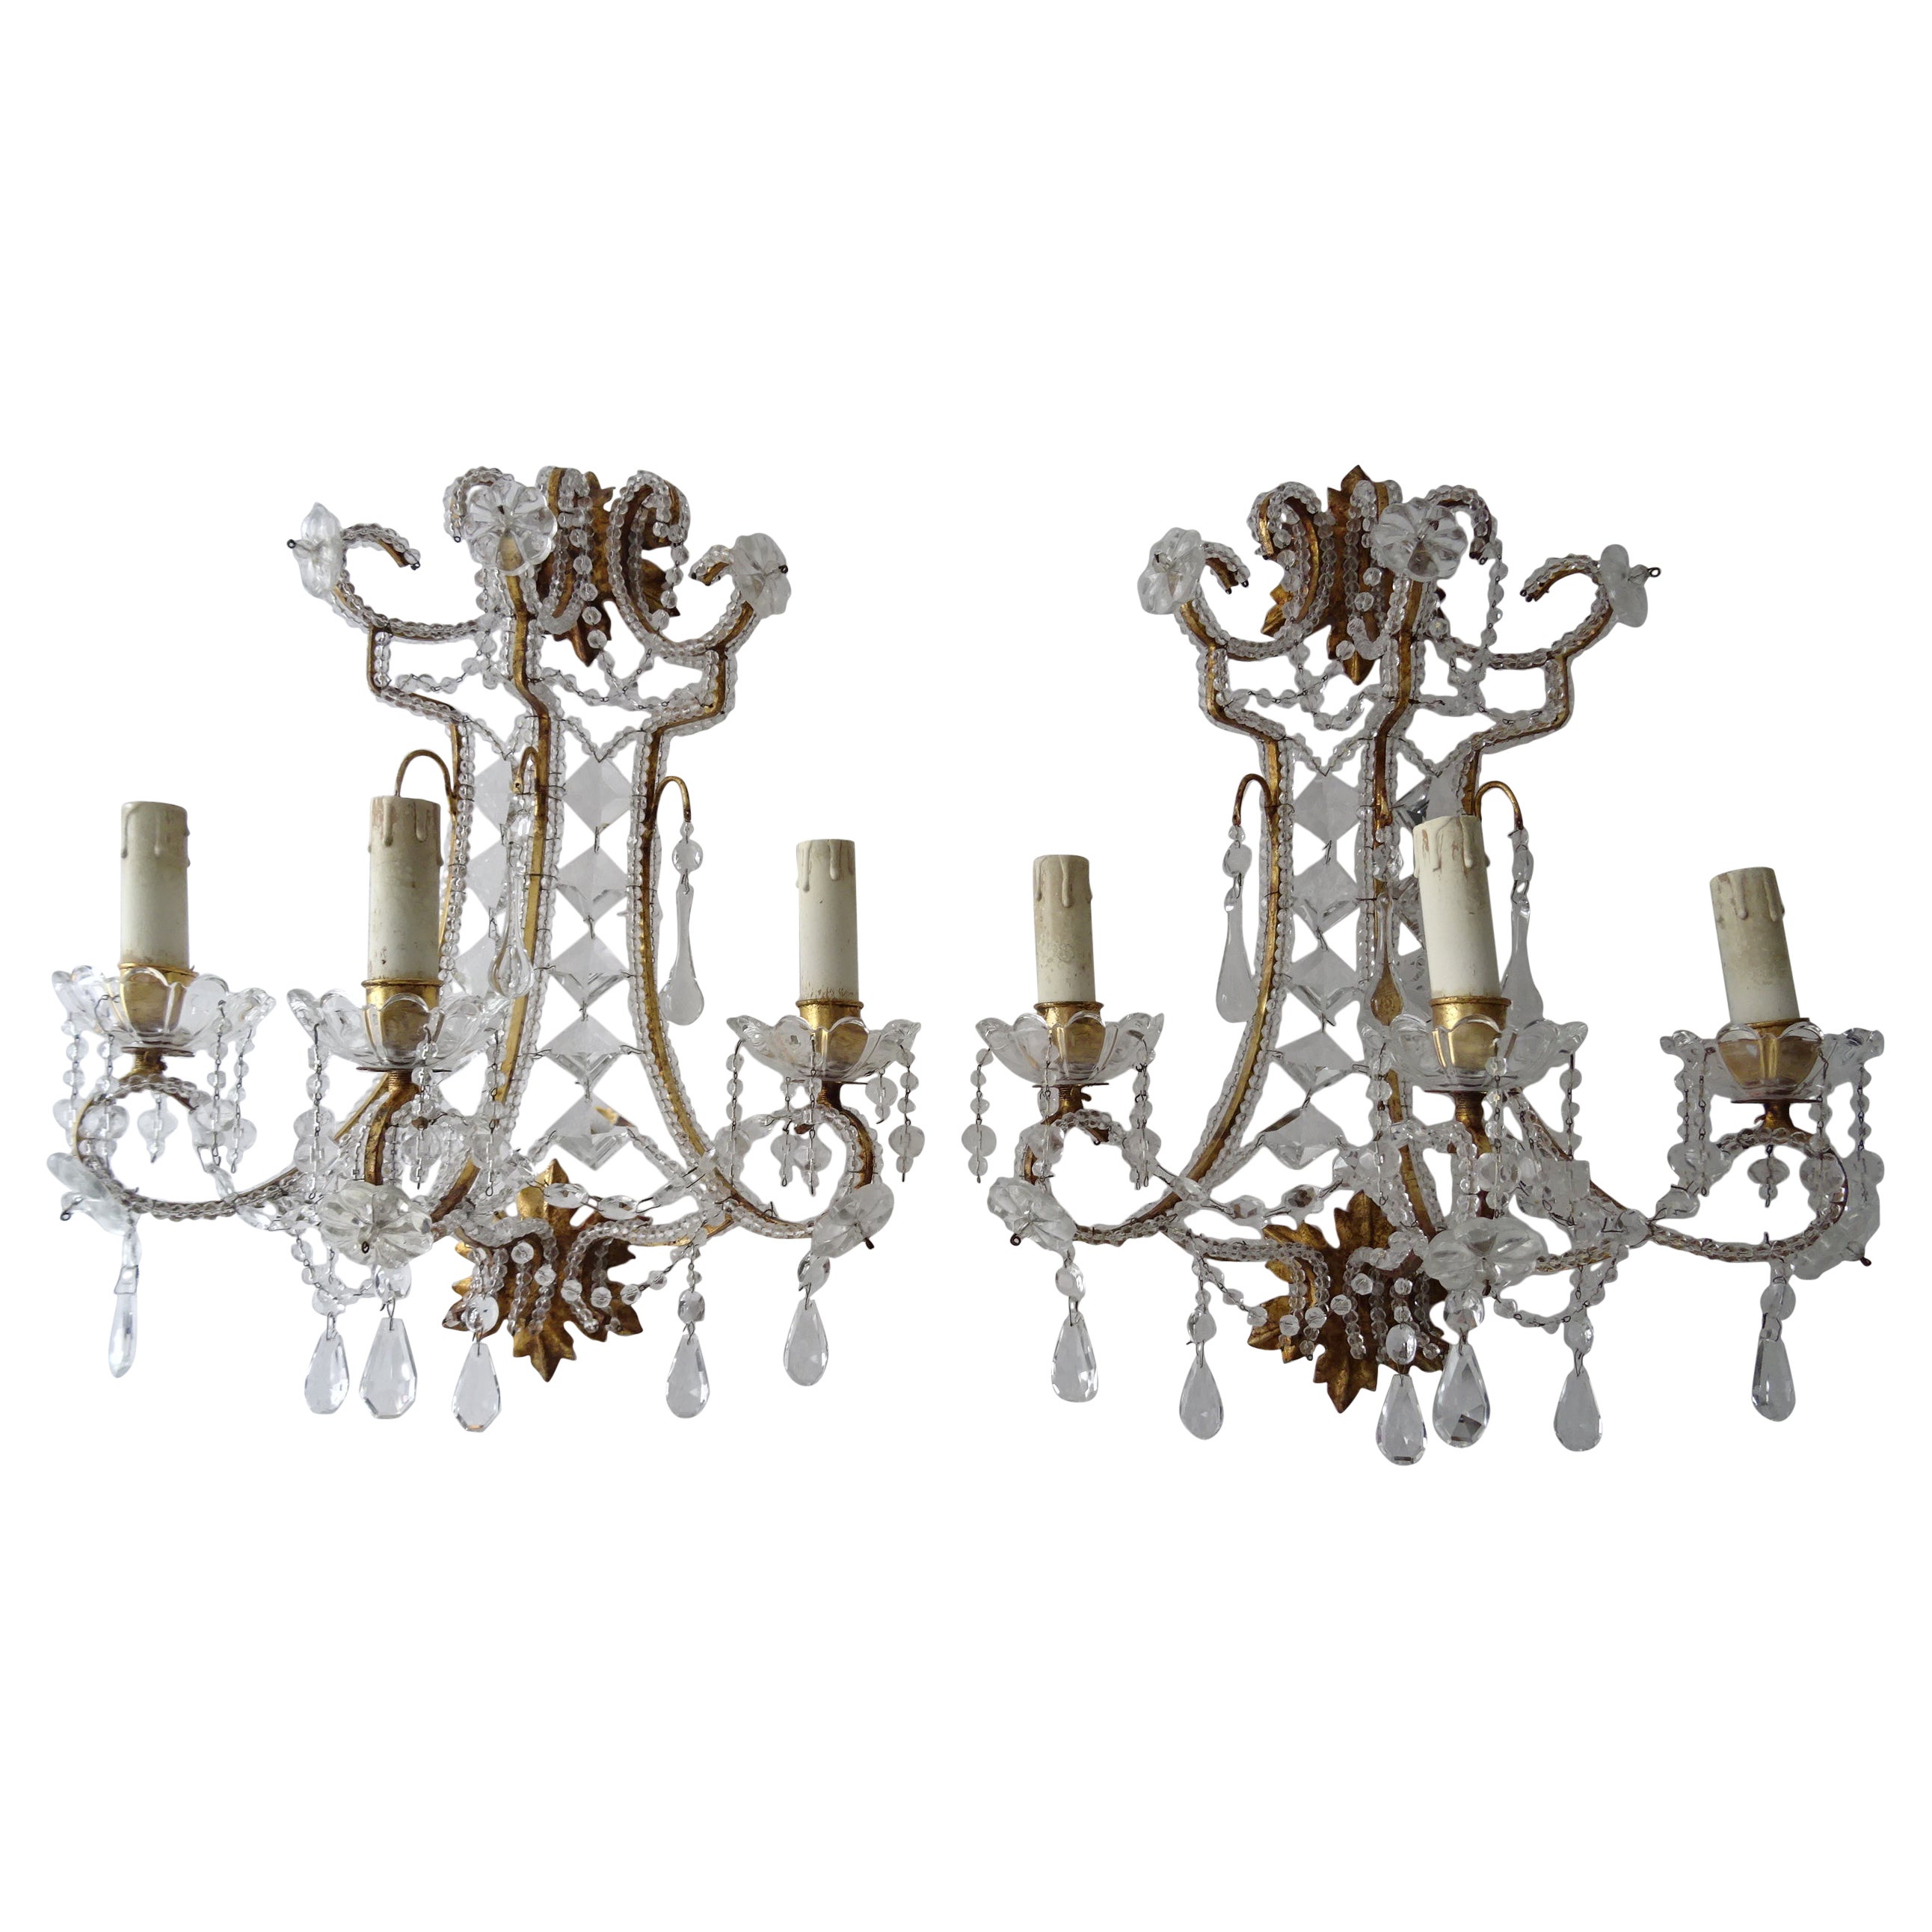 Italian Big Beaded Crystal Prisms Murano Drops Sconces Gold Gilt Metal c1900 For Sale